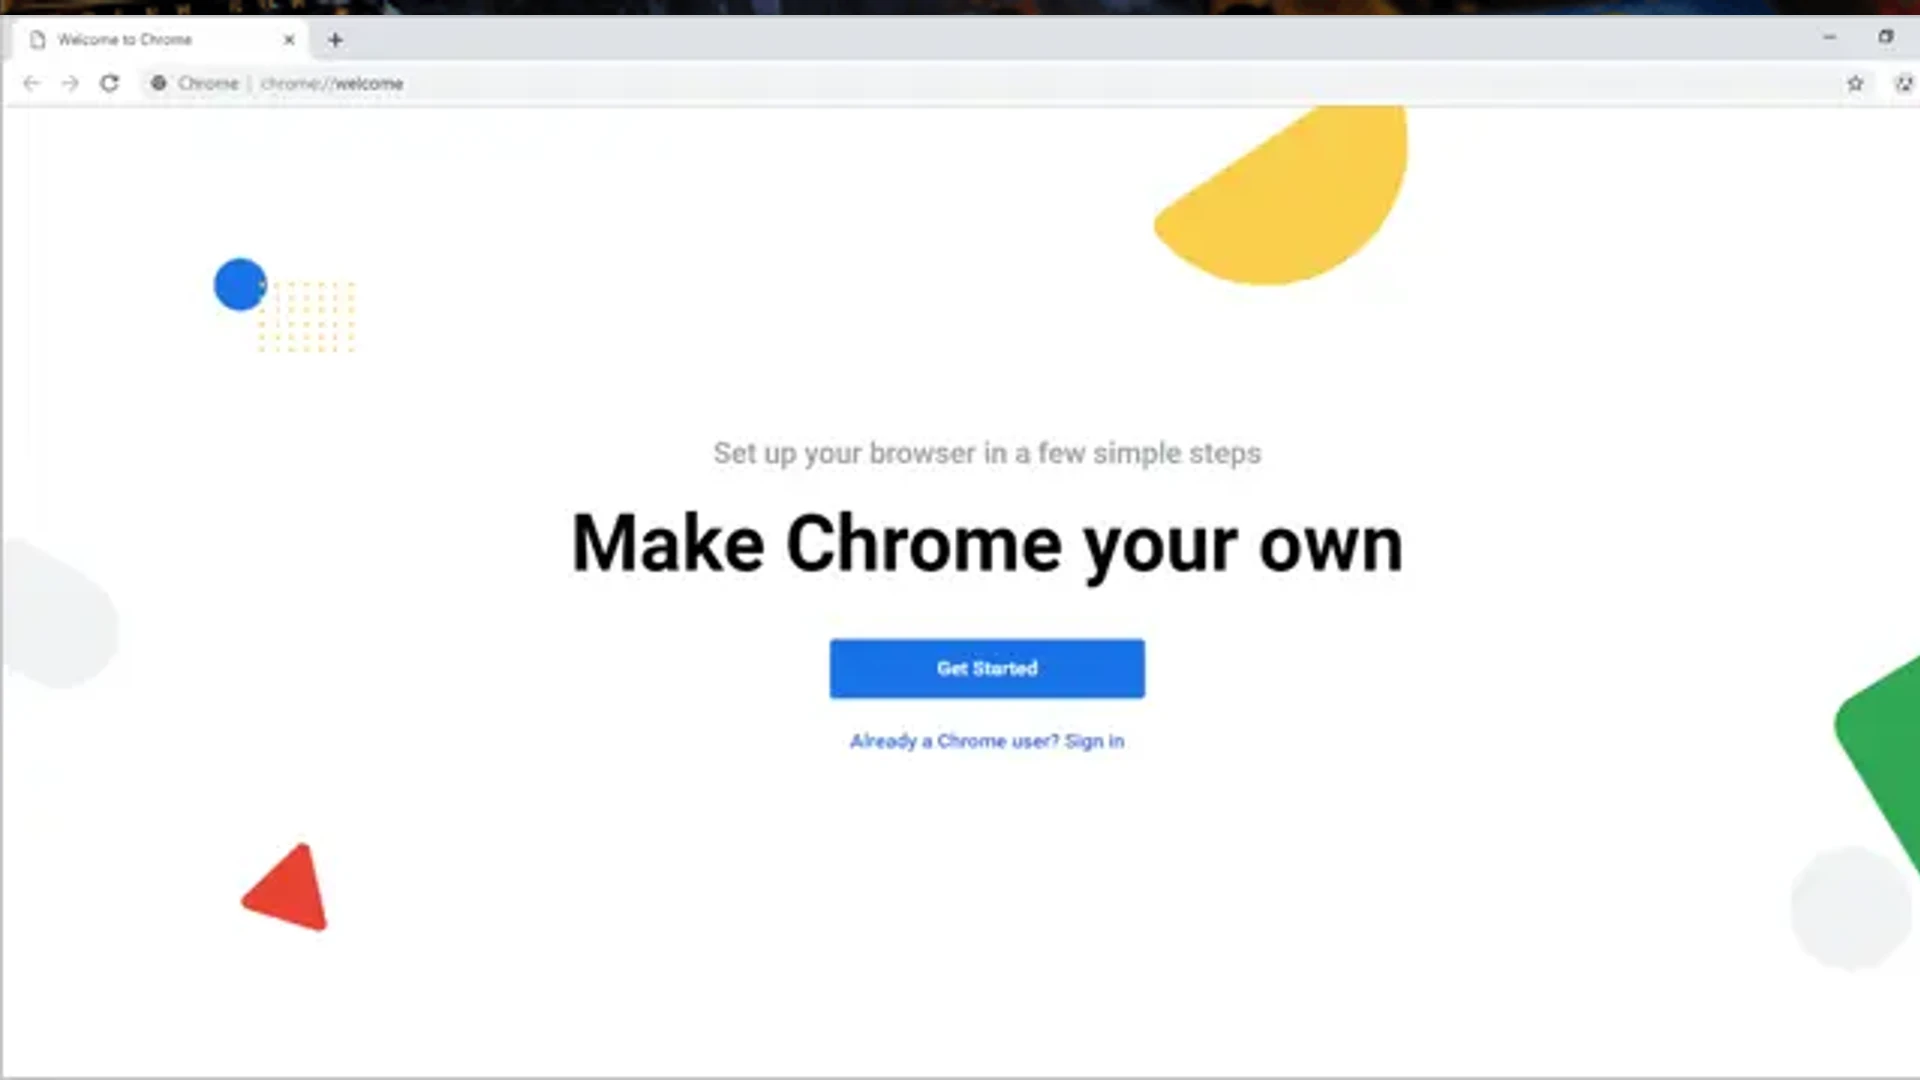 How to transfer Google Chrome profile to another computer